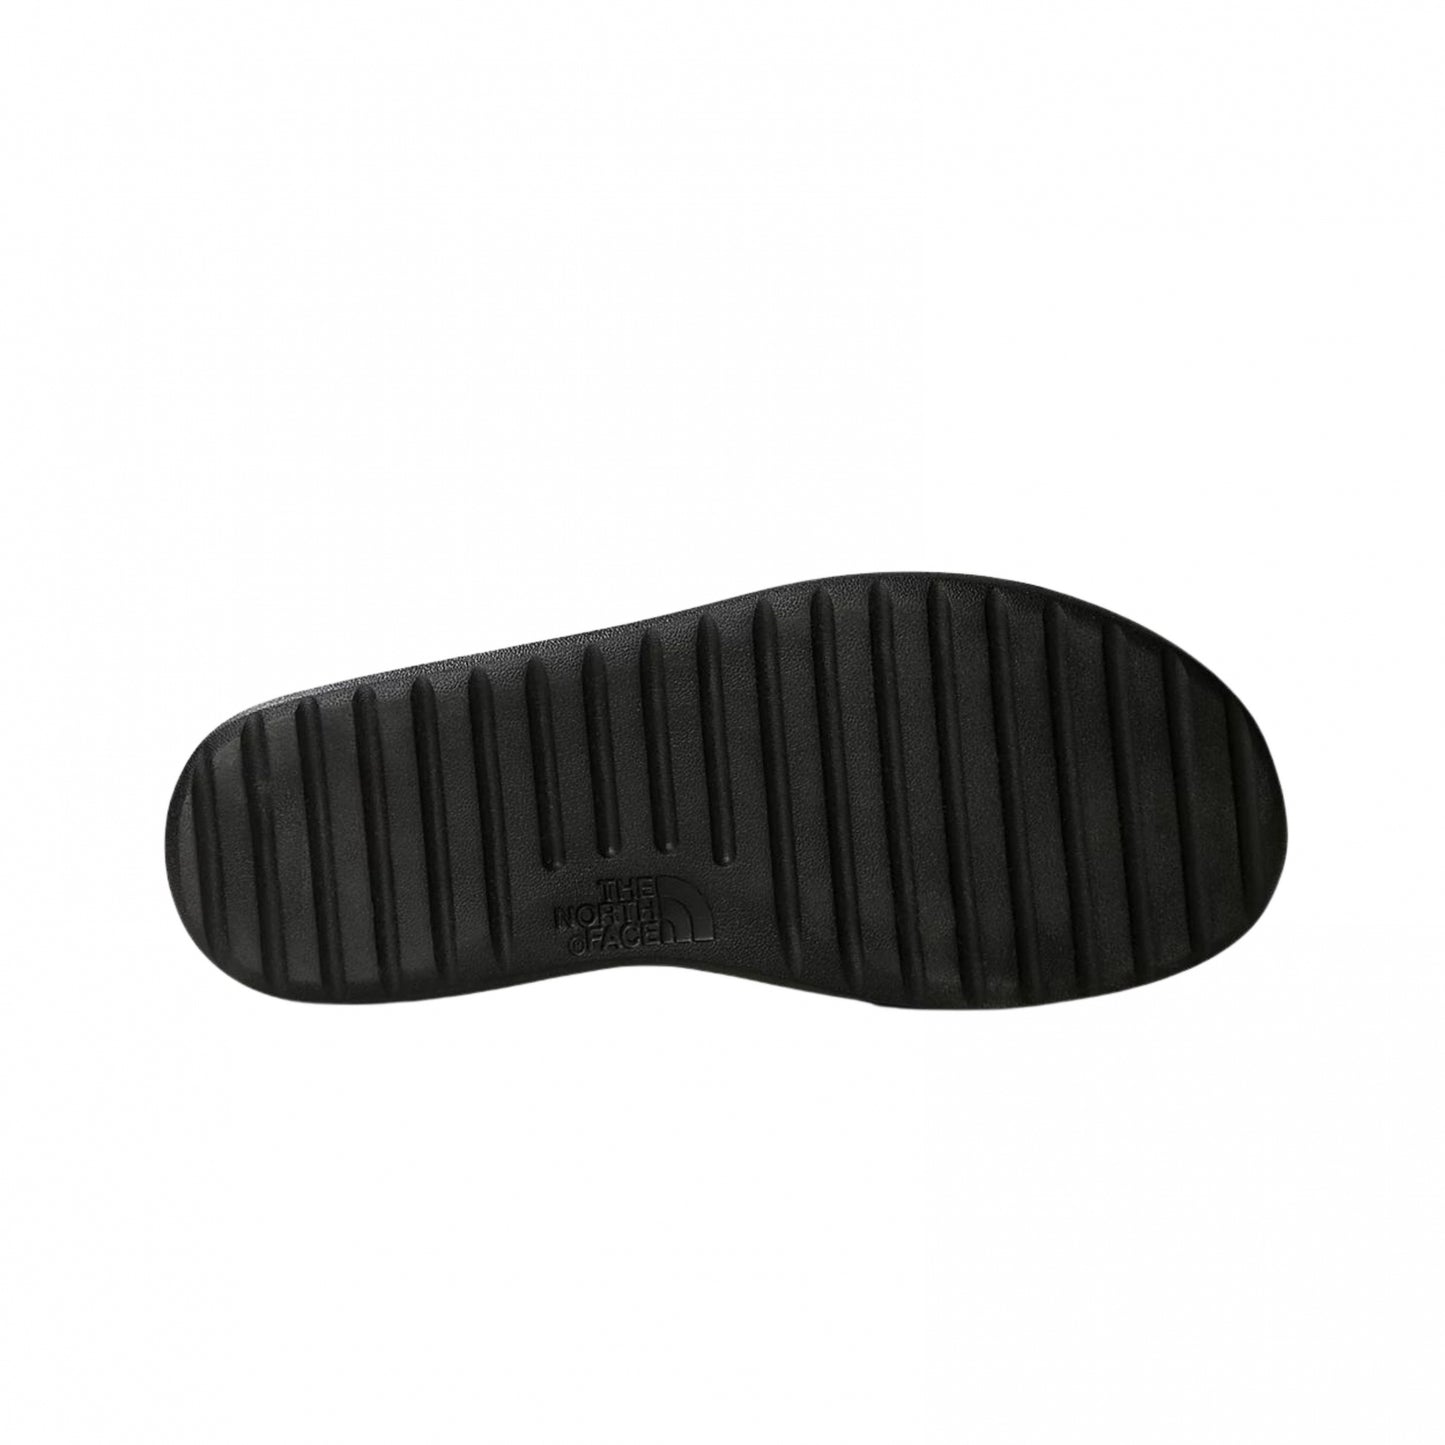 The North Face Triarch Slide BLACK slippers